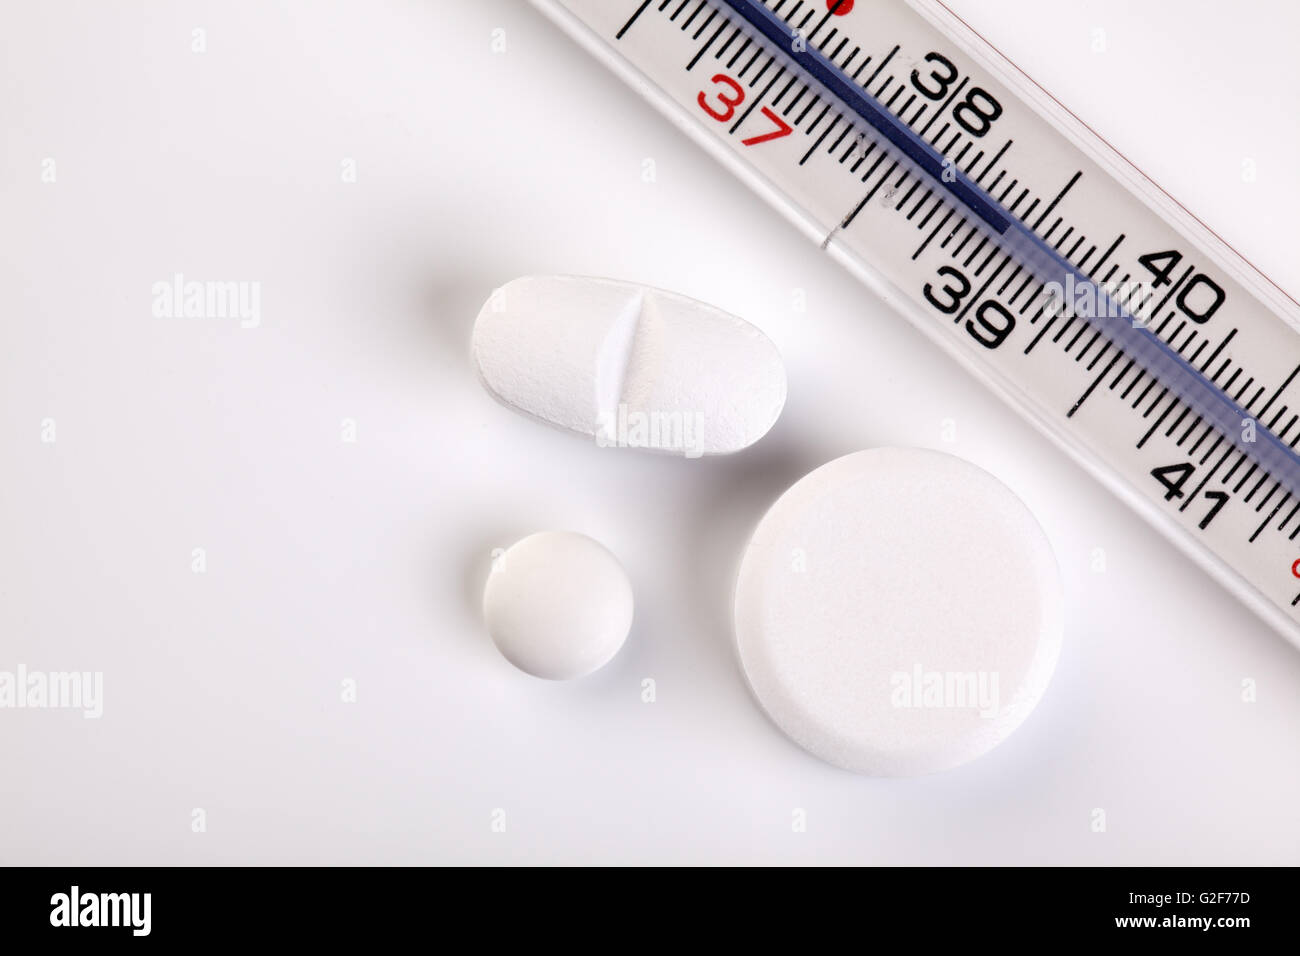 Fever thermometer showing a temperature of 39 degrees celsius and some pills Stock Photo